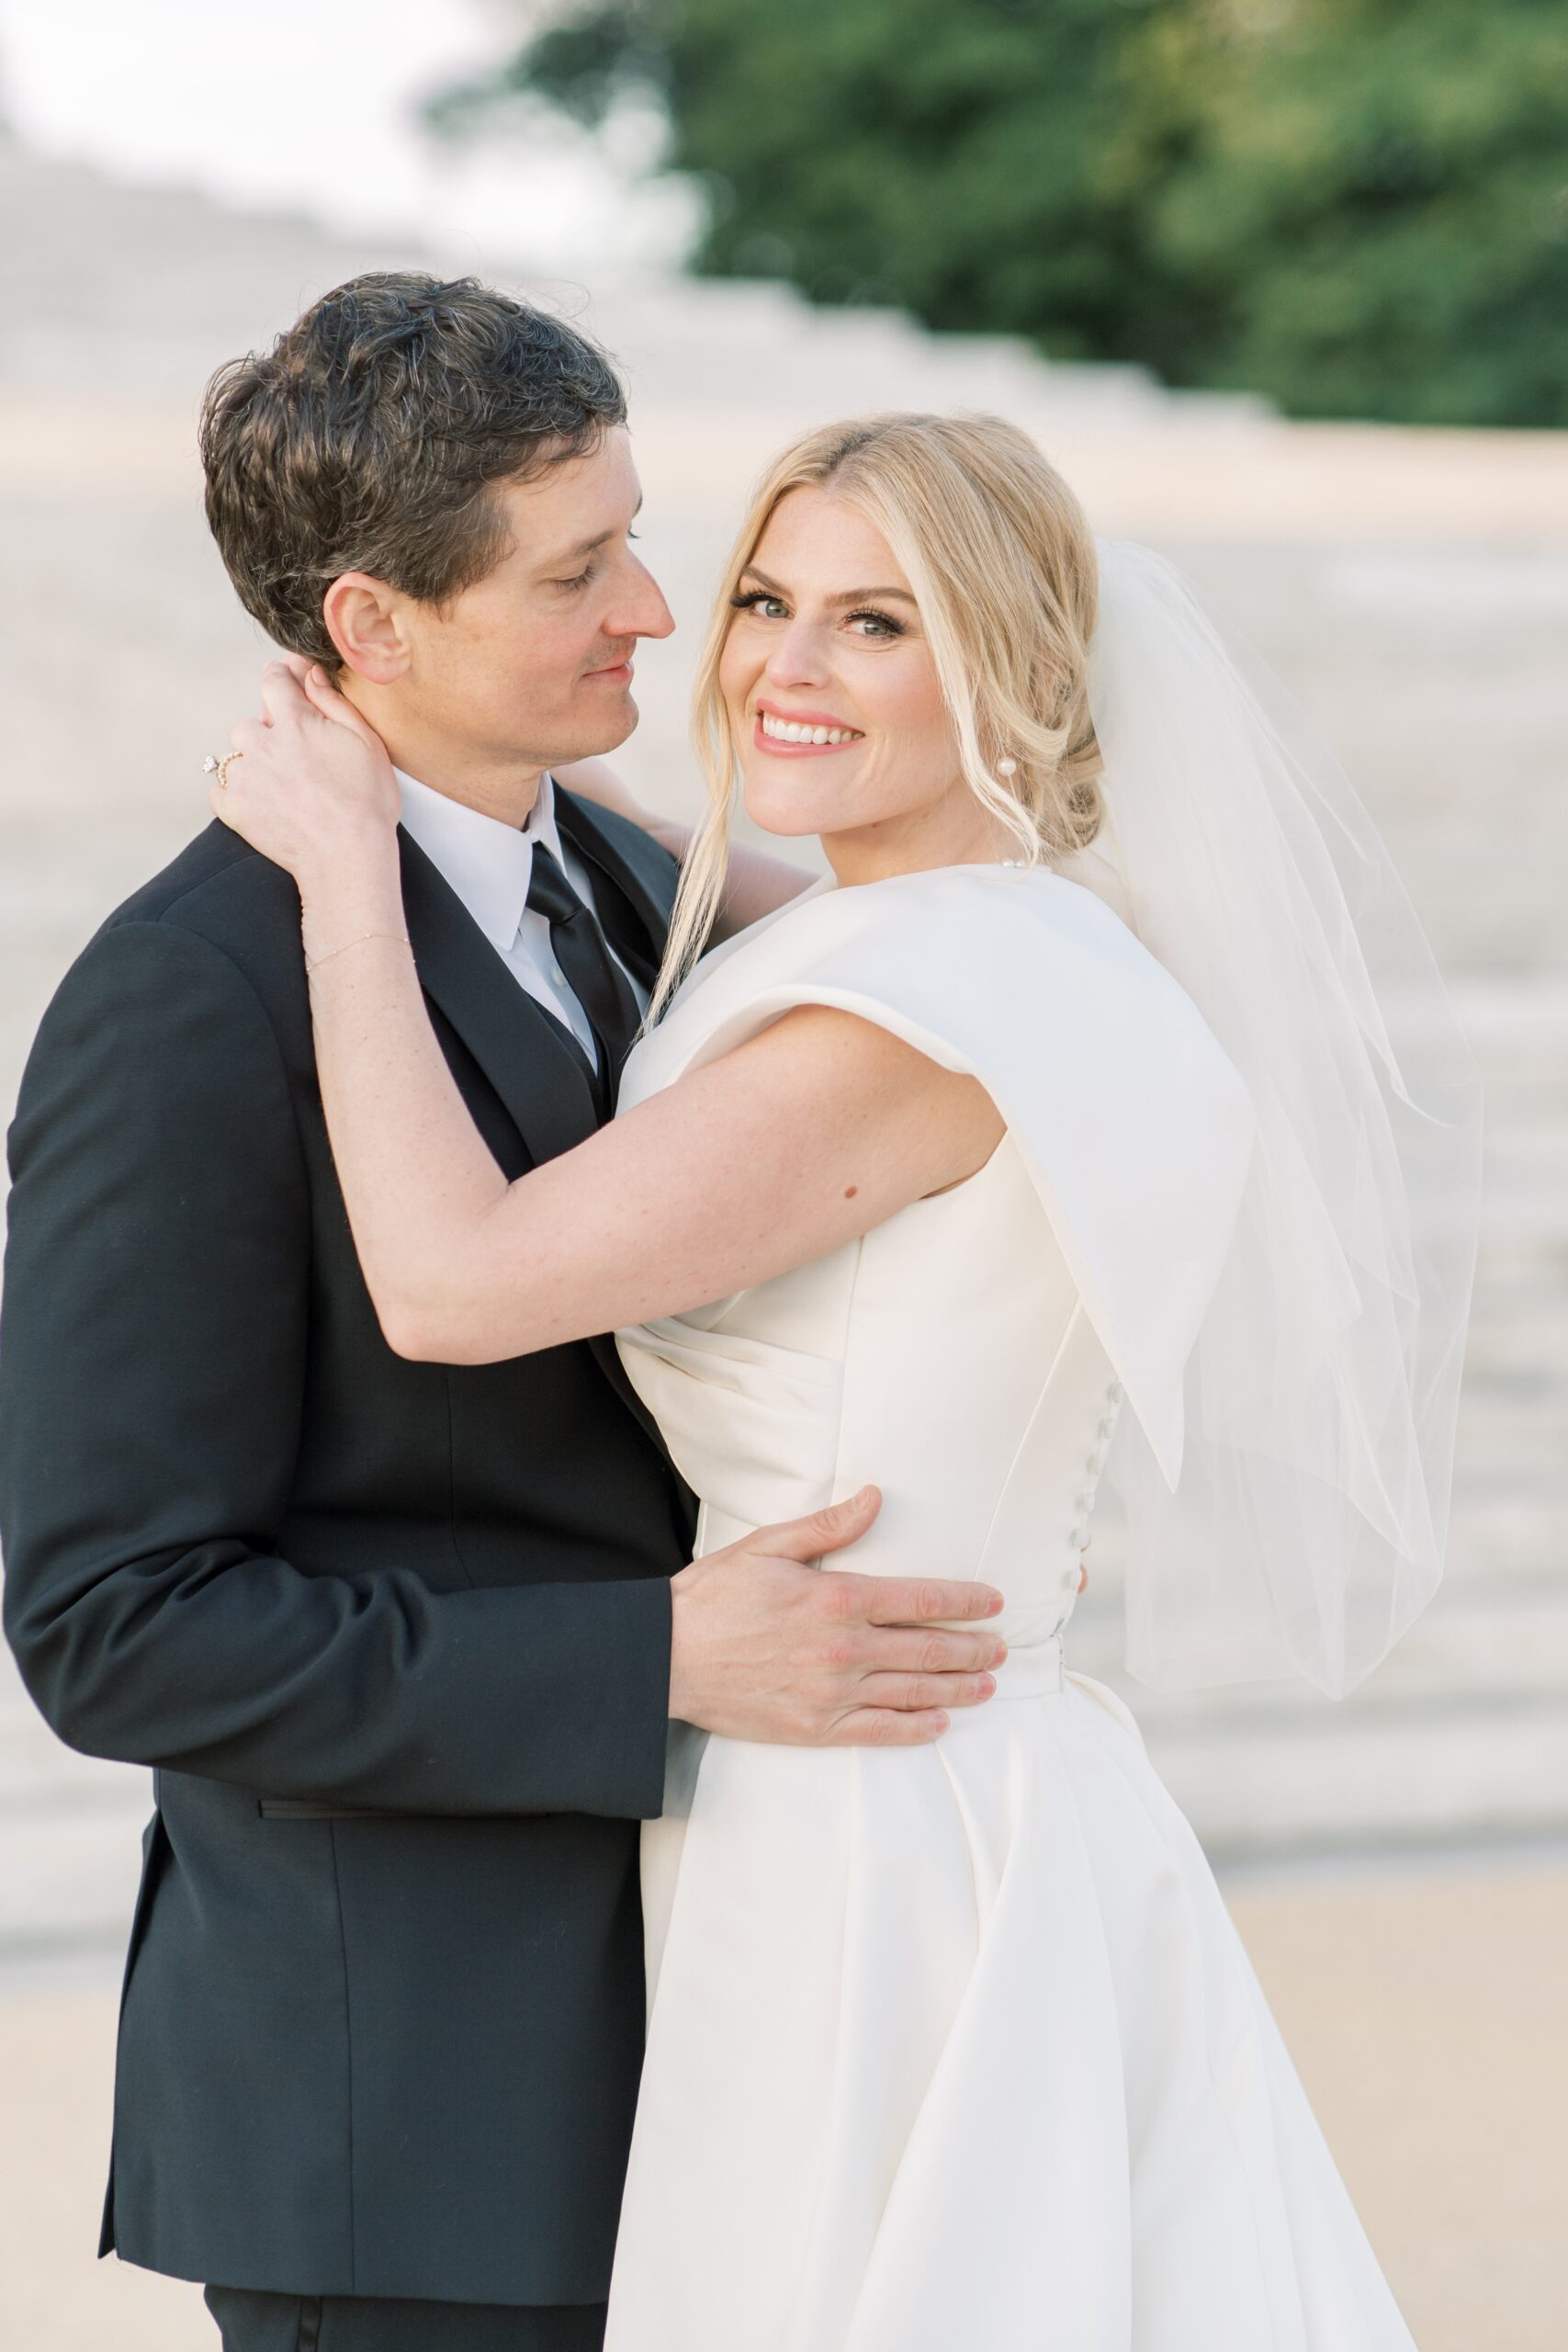 Stunning "day after" wedding portraits at the Jefferson Memorial in Washington, DC.